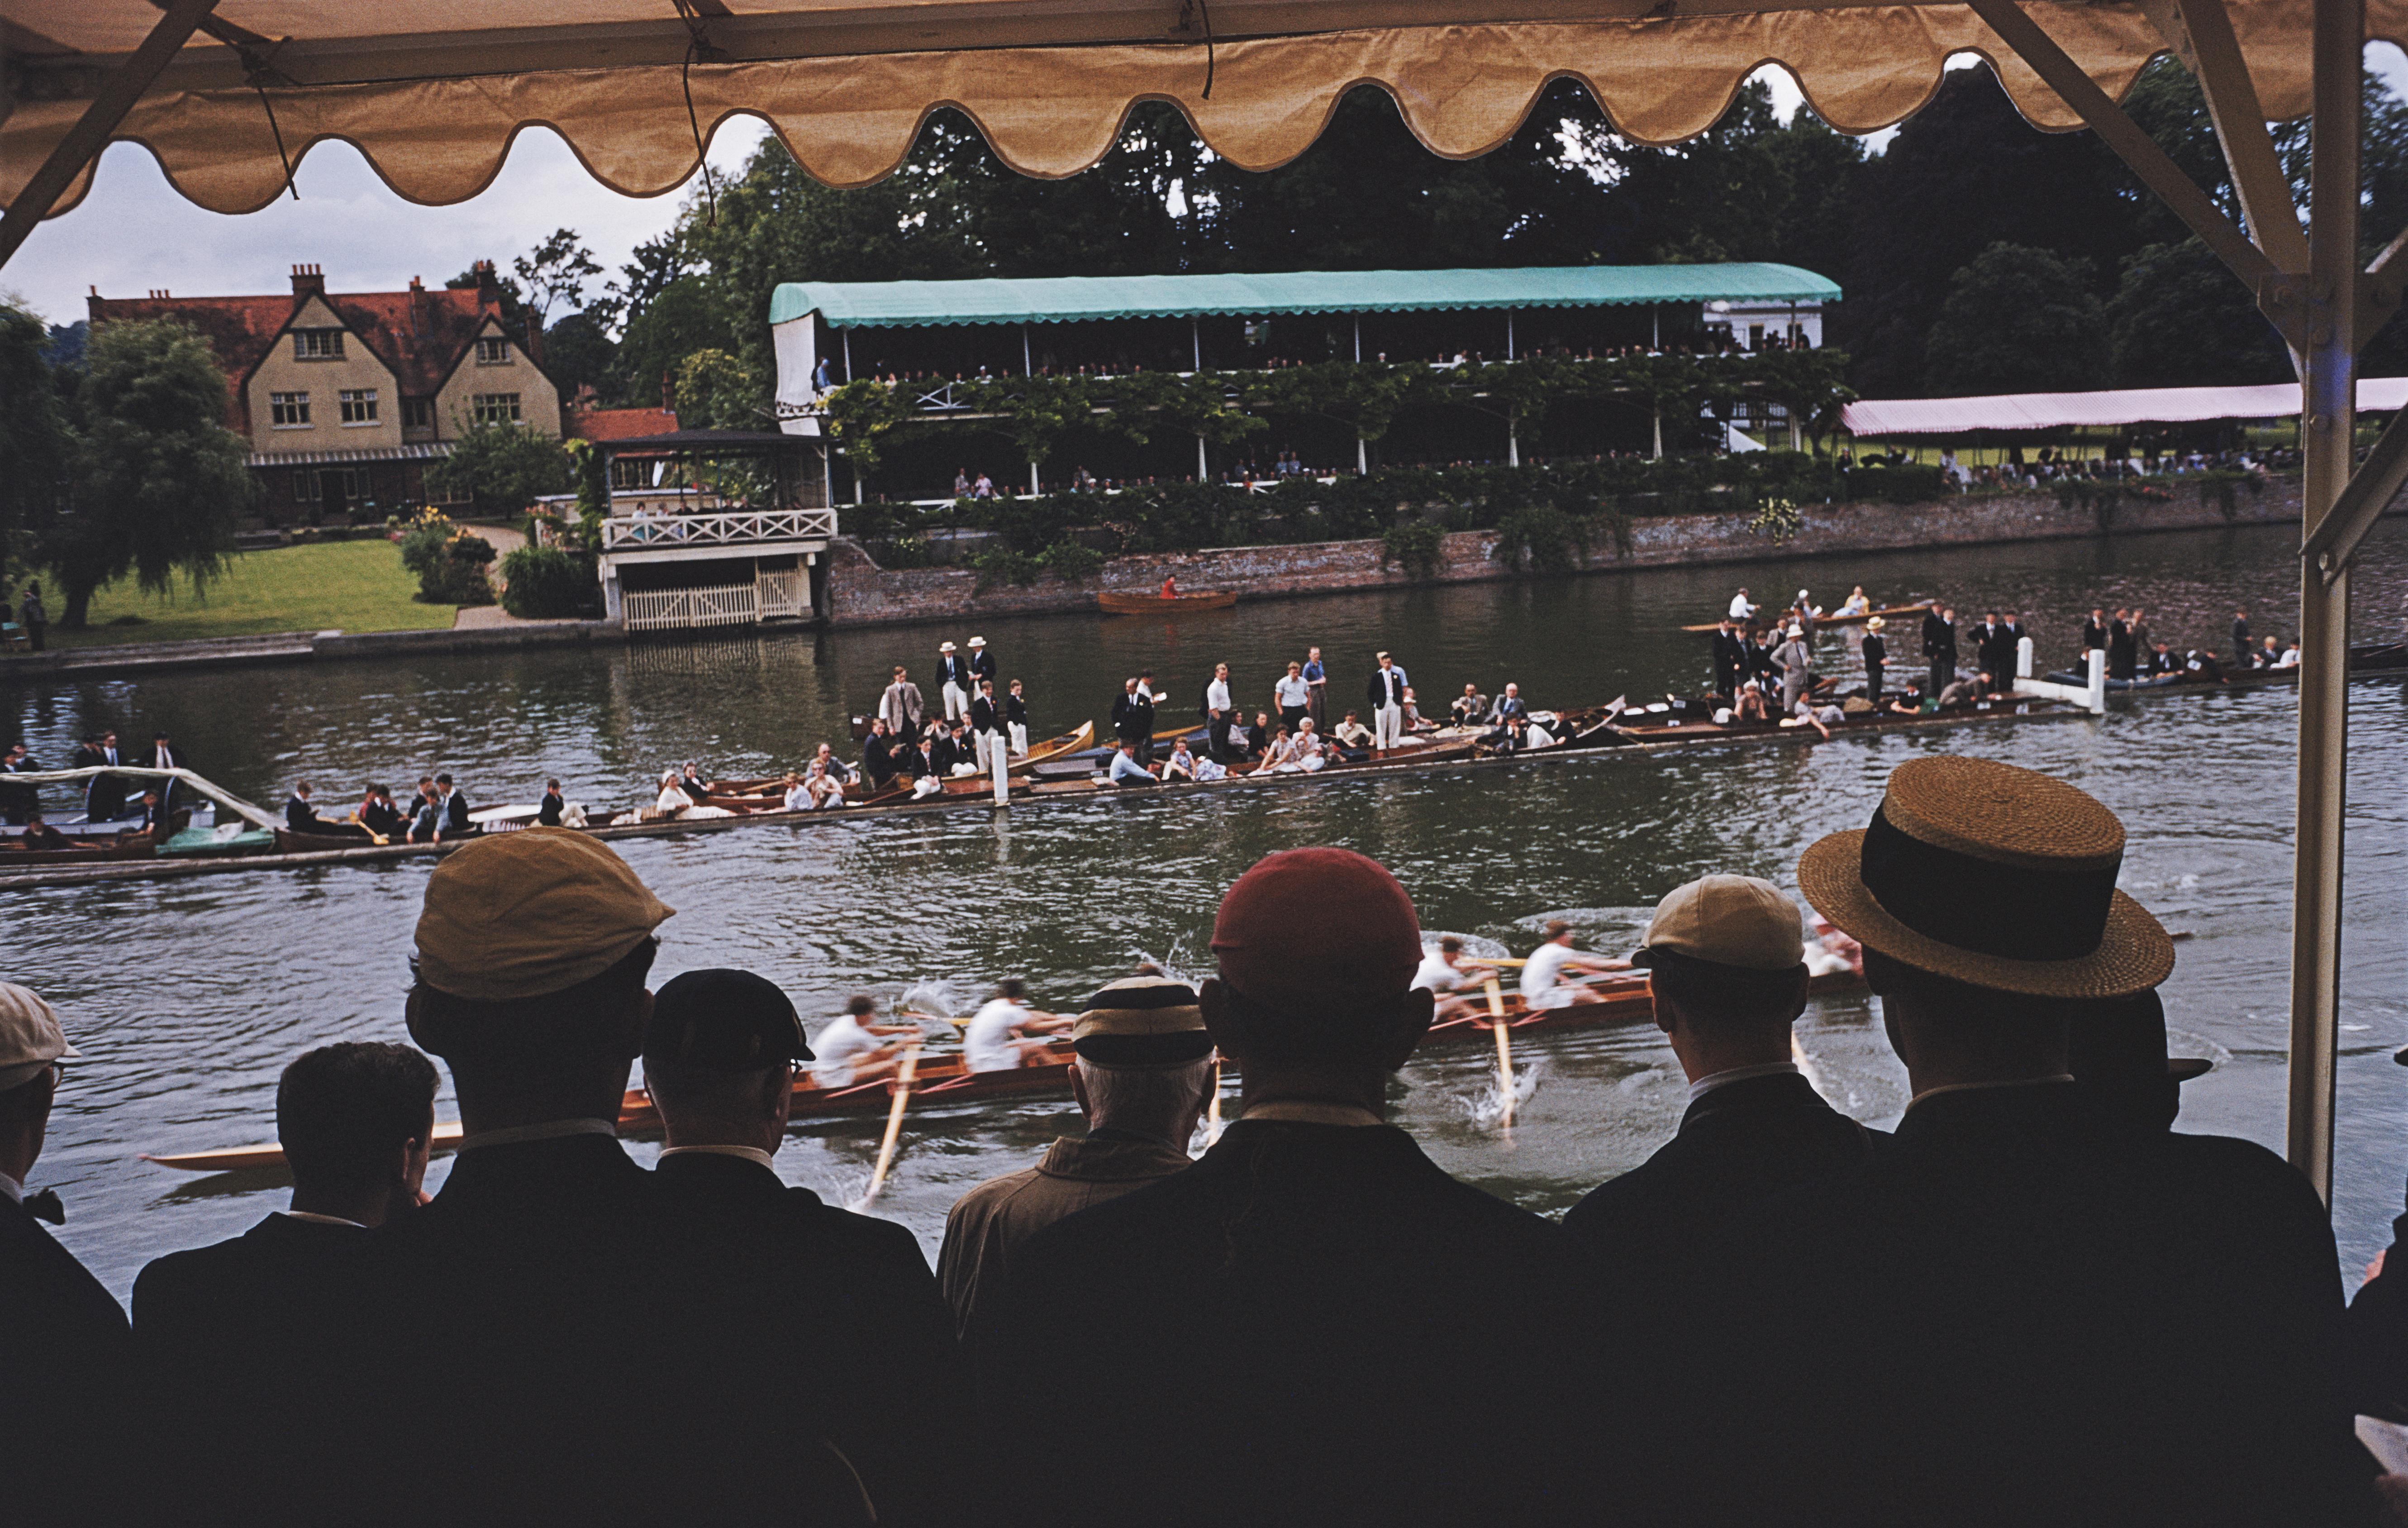 'Henley Royal Regatta' 1955 Slim Aarons Limited Estate Edition Print 

Spectators at the Henley Royal Regatta on the River Thames, 1955. (Photo by Slim Aarons/Getty Images)

Produced from the original transparency
Certificate of authenticity